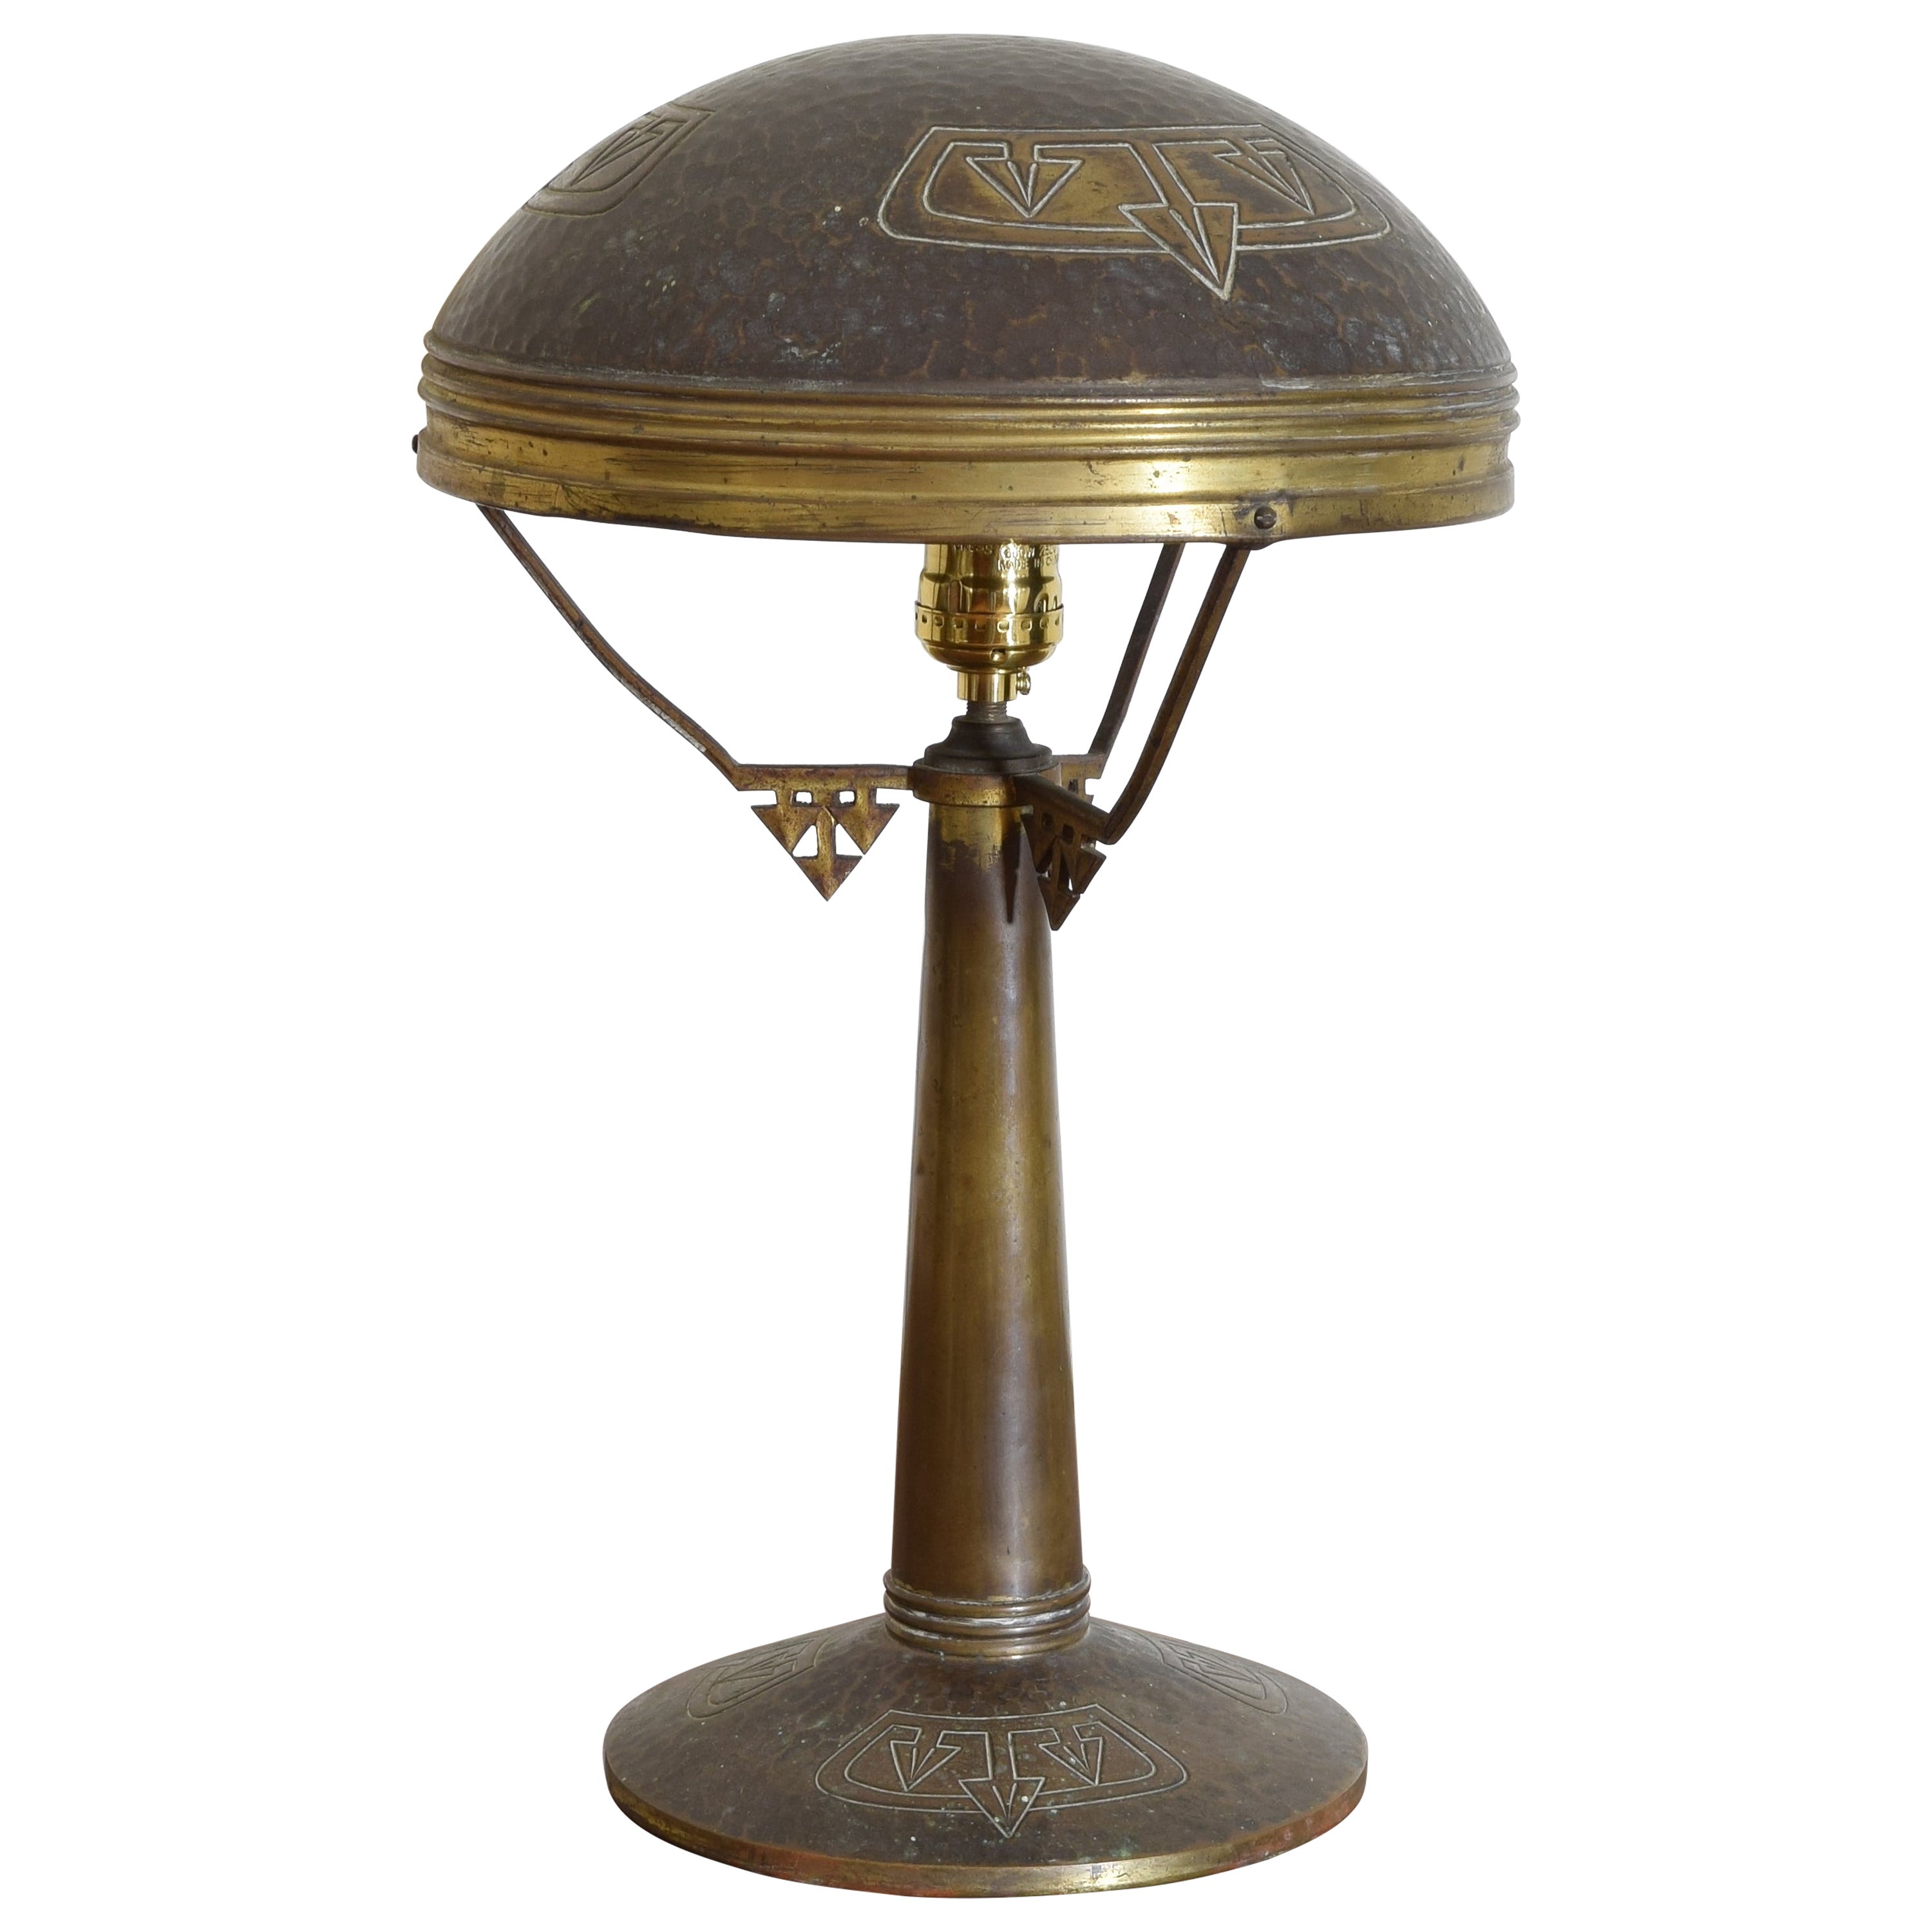 French Arts and Crafts Patinated Brass Table Lamp, early 20th century